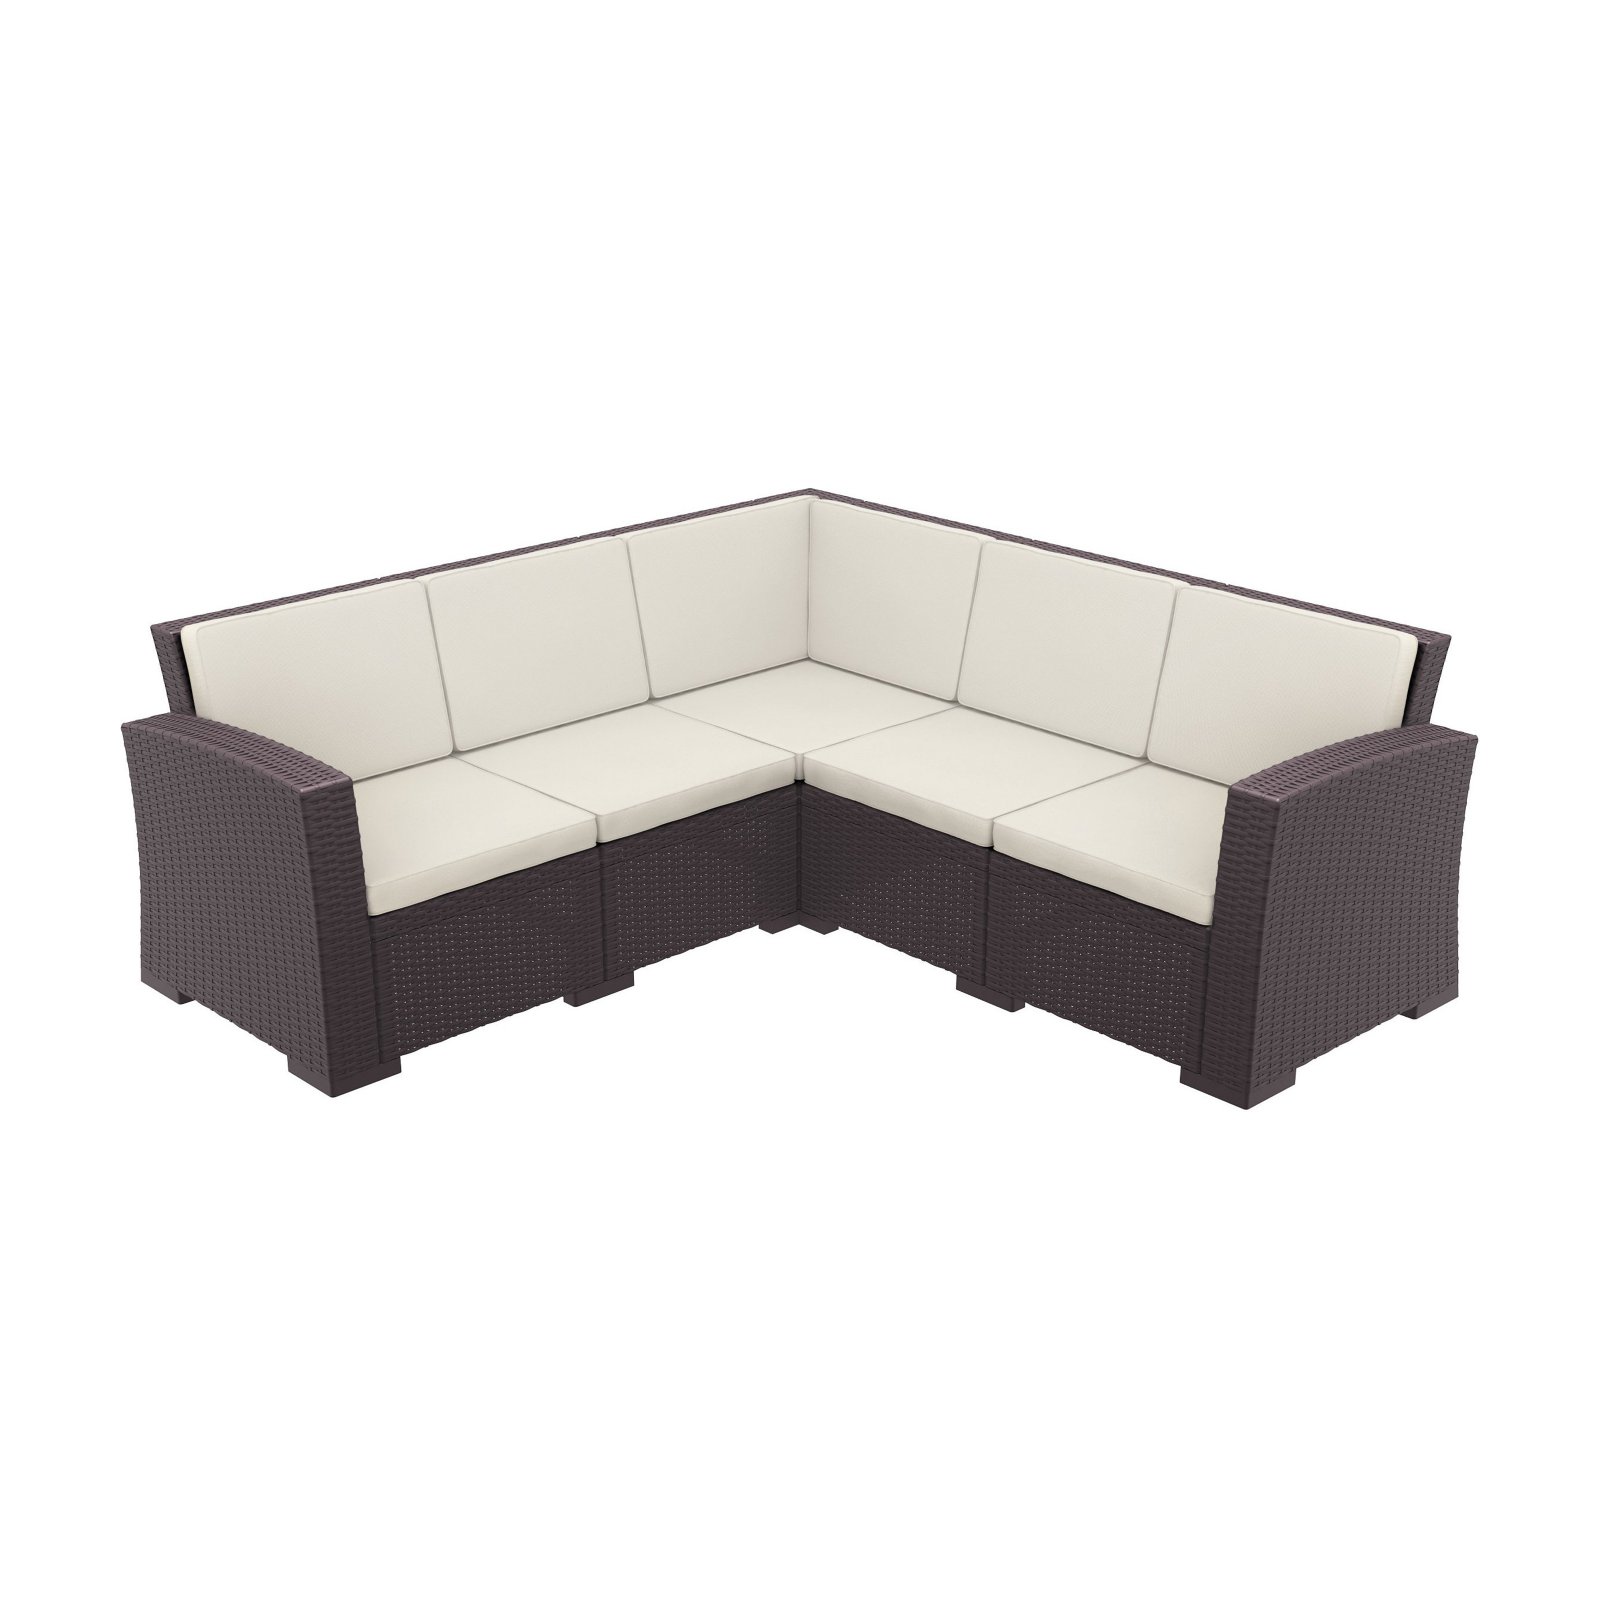 Compamia Monaco 5 Piece Outdoor Sectional in Brown with Cushion - image 1 of 11